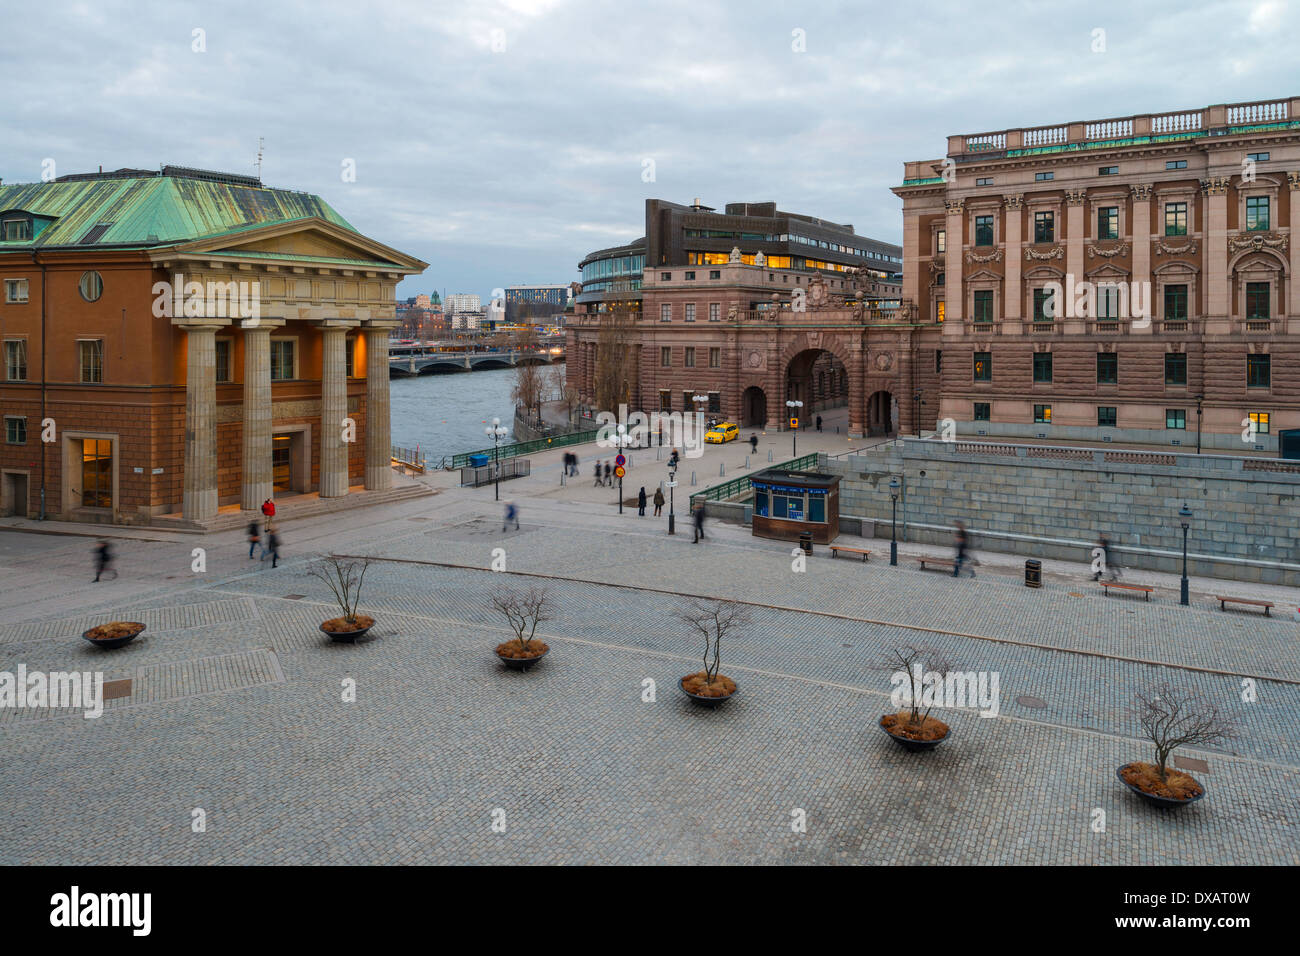 Tage Erlanders Plats and the Stallbron bridge seen from the terrace by the outer courtyard of the Royal Palace, Stockholm Sweden Stock Photo